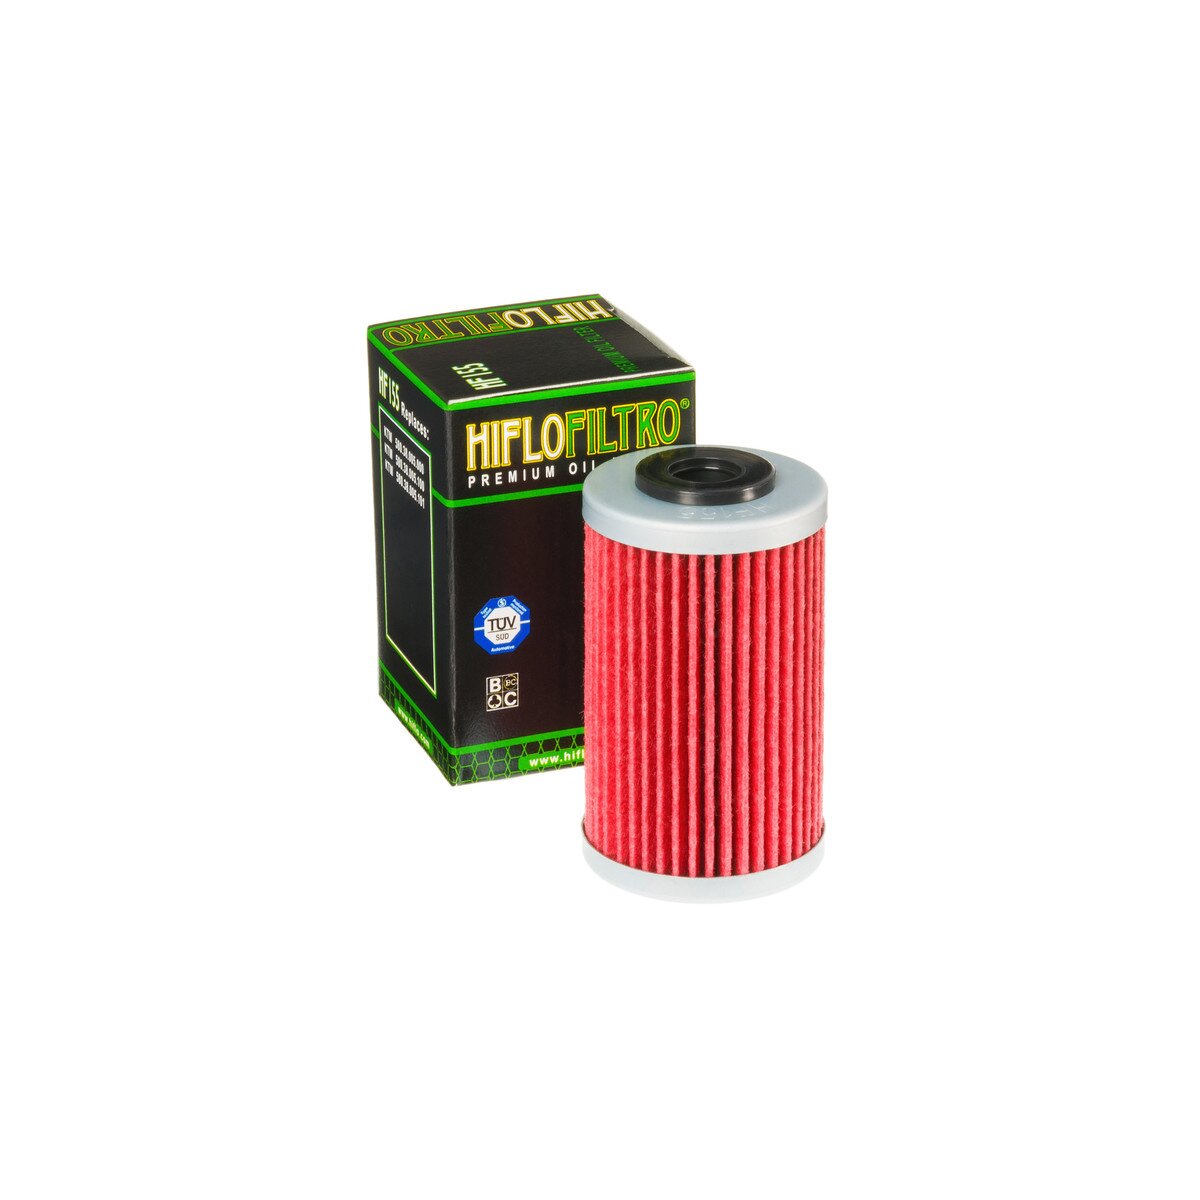 Oil filter kit suitable for KTM 400 540 620 LC4 SC SXC with micro filter